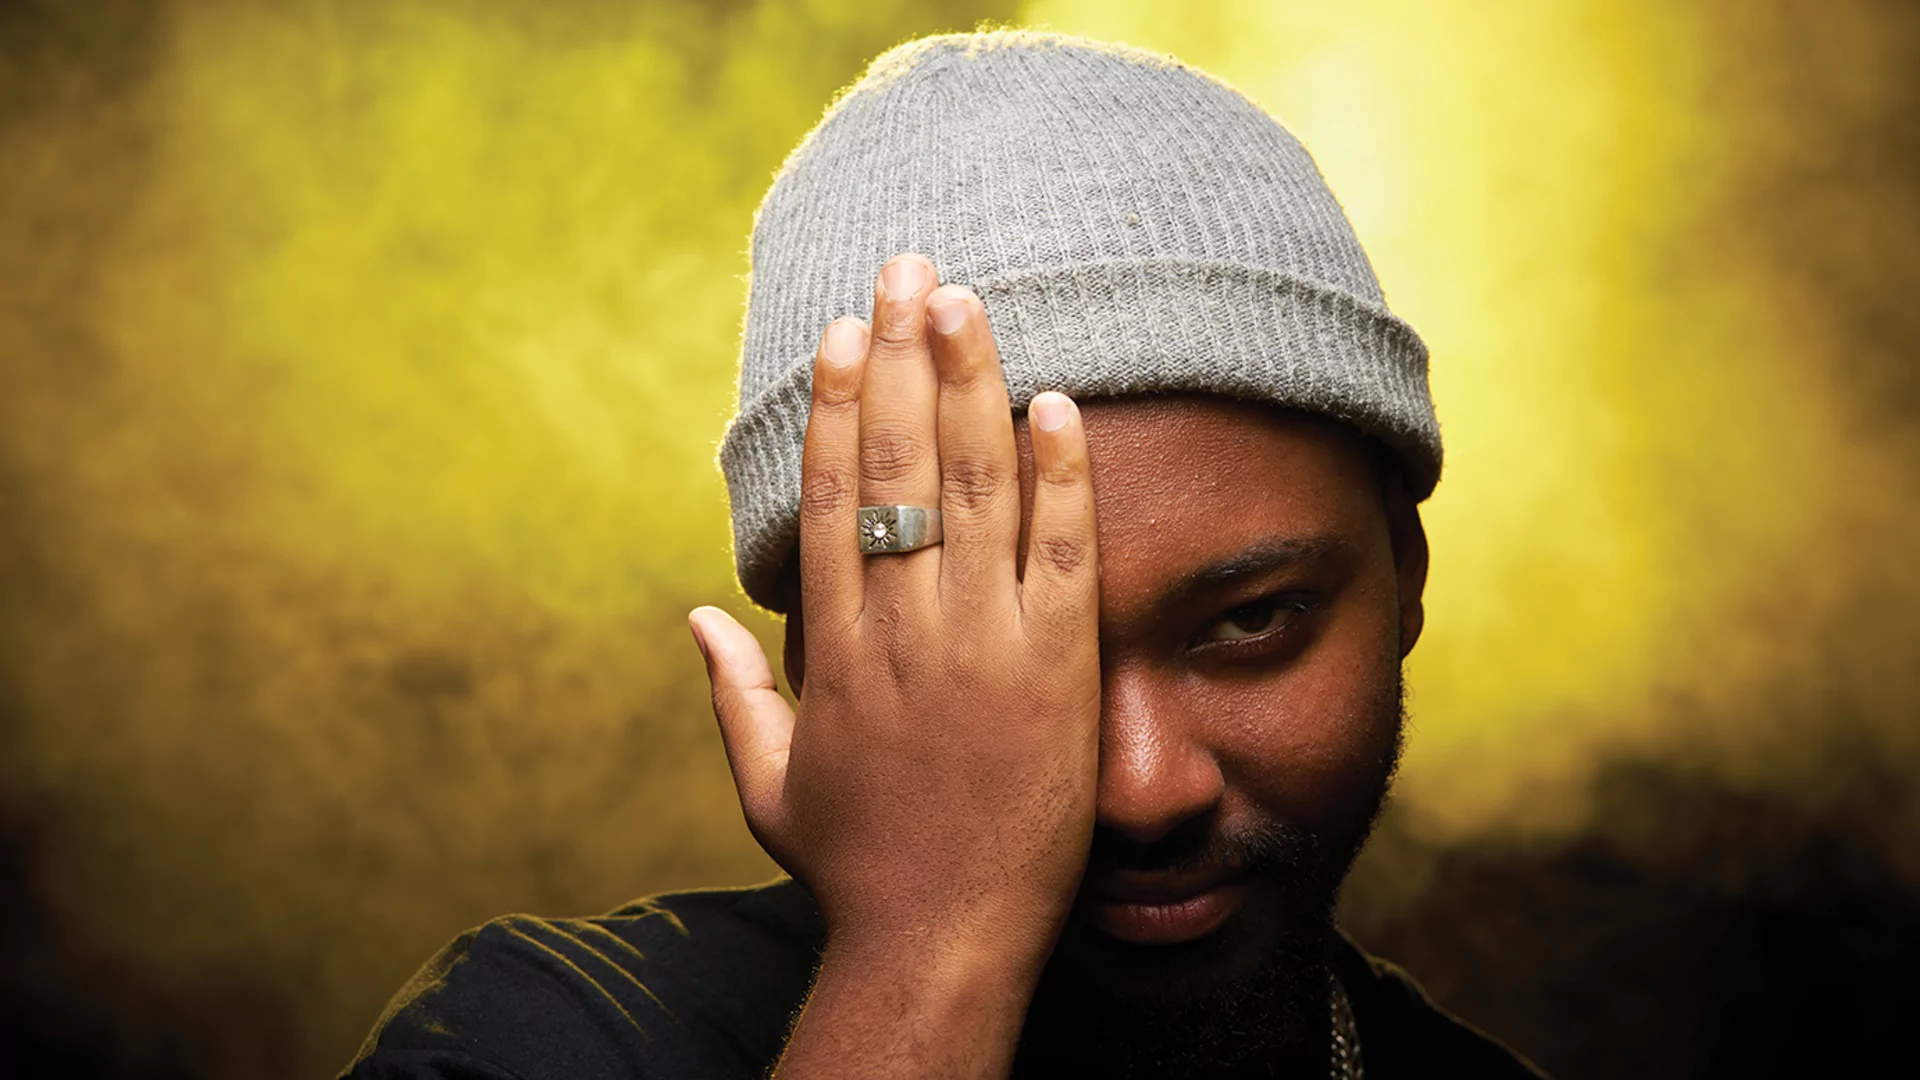 Thuto the Human's press shot. He's against a smoky yellow background and wearing a grey beanie hat. His right hand is covering his eye